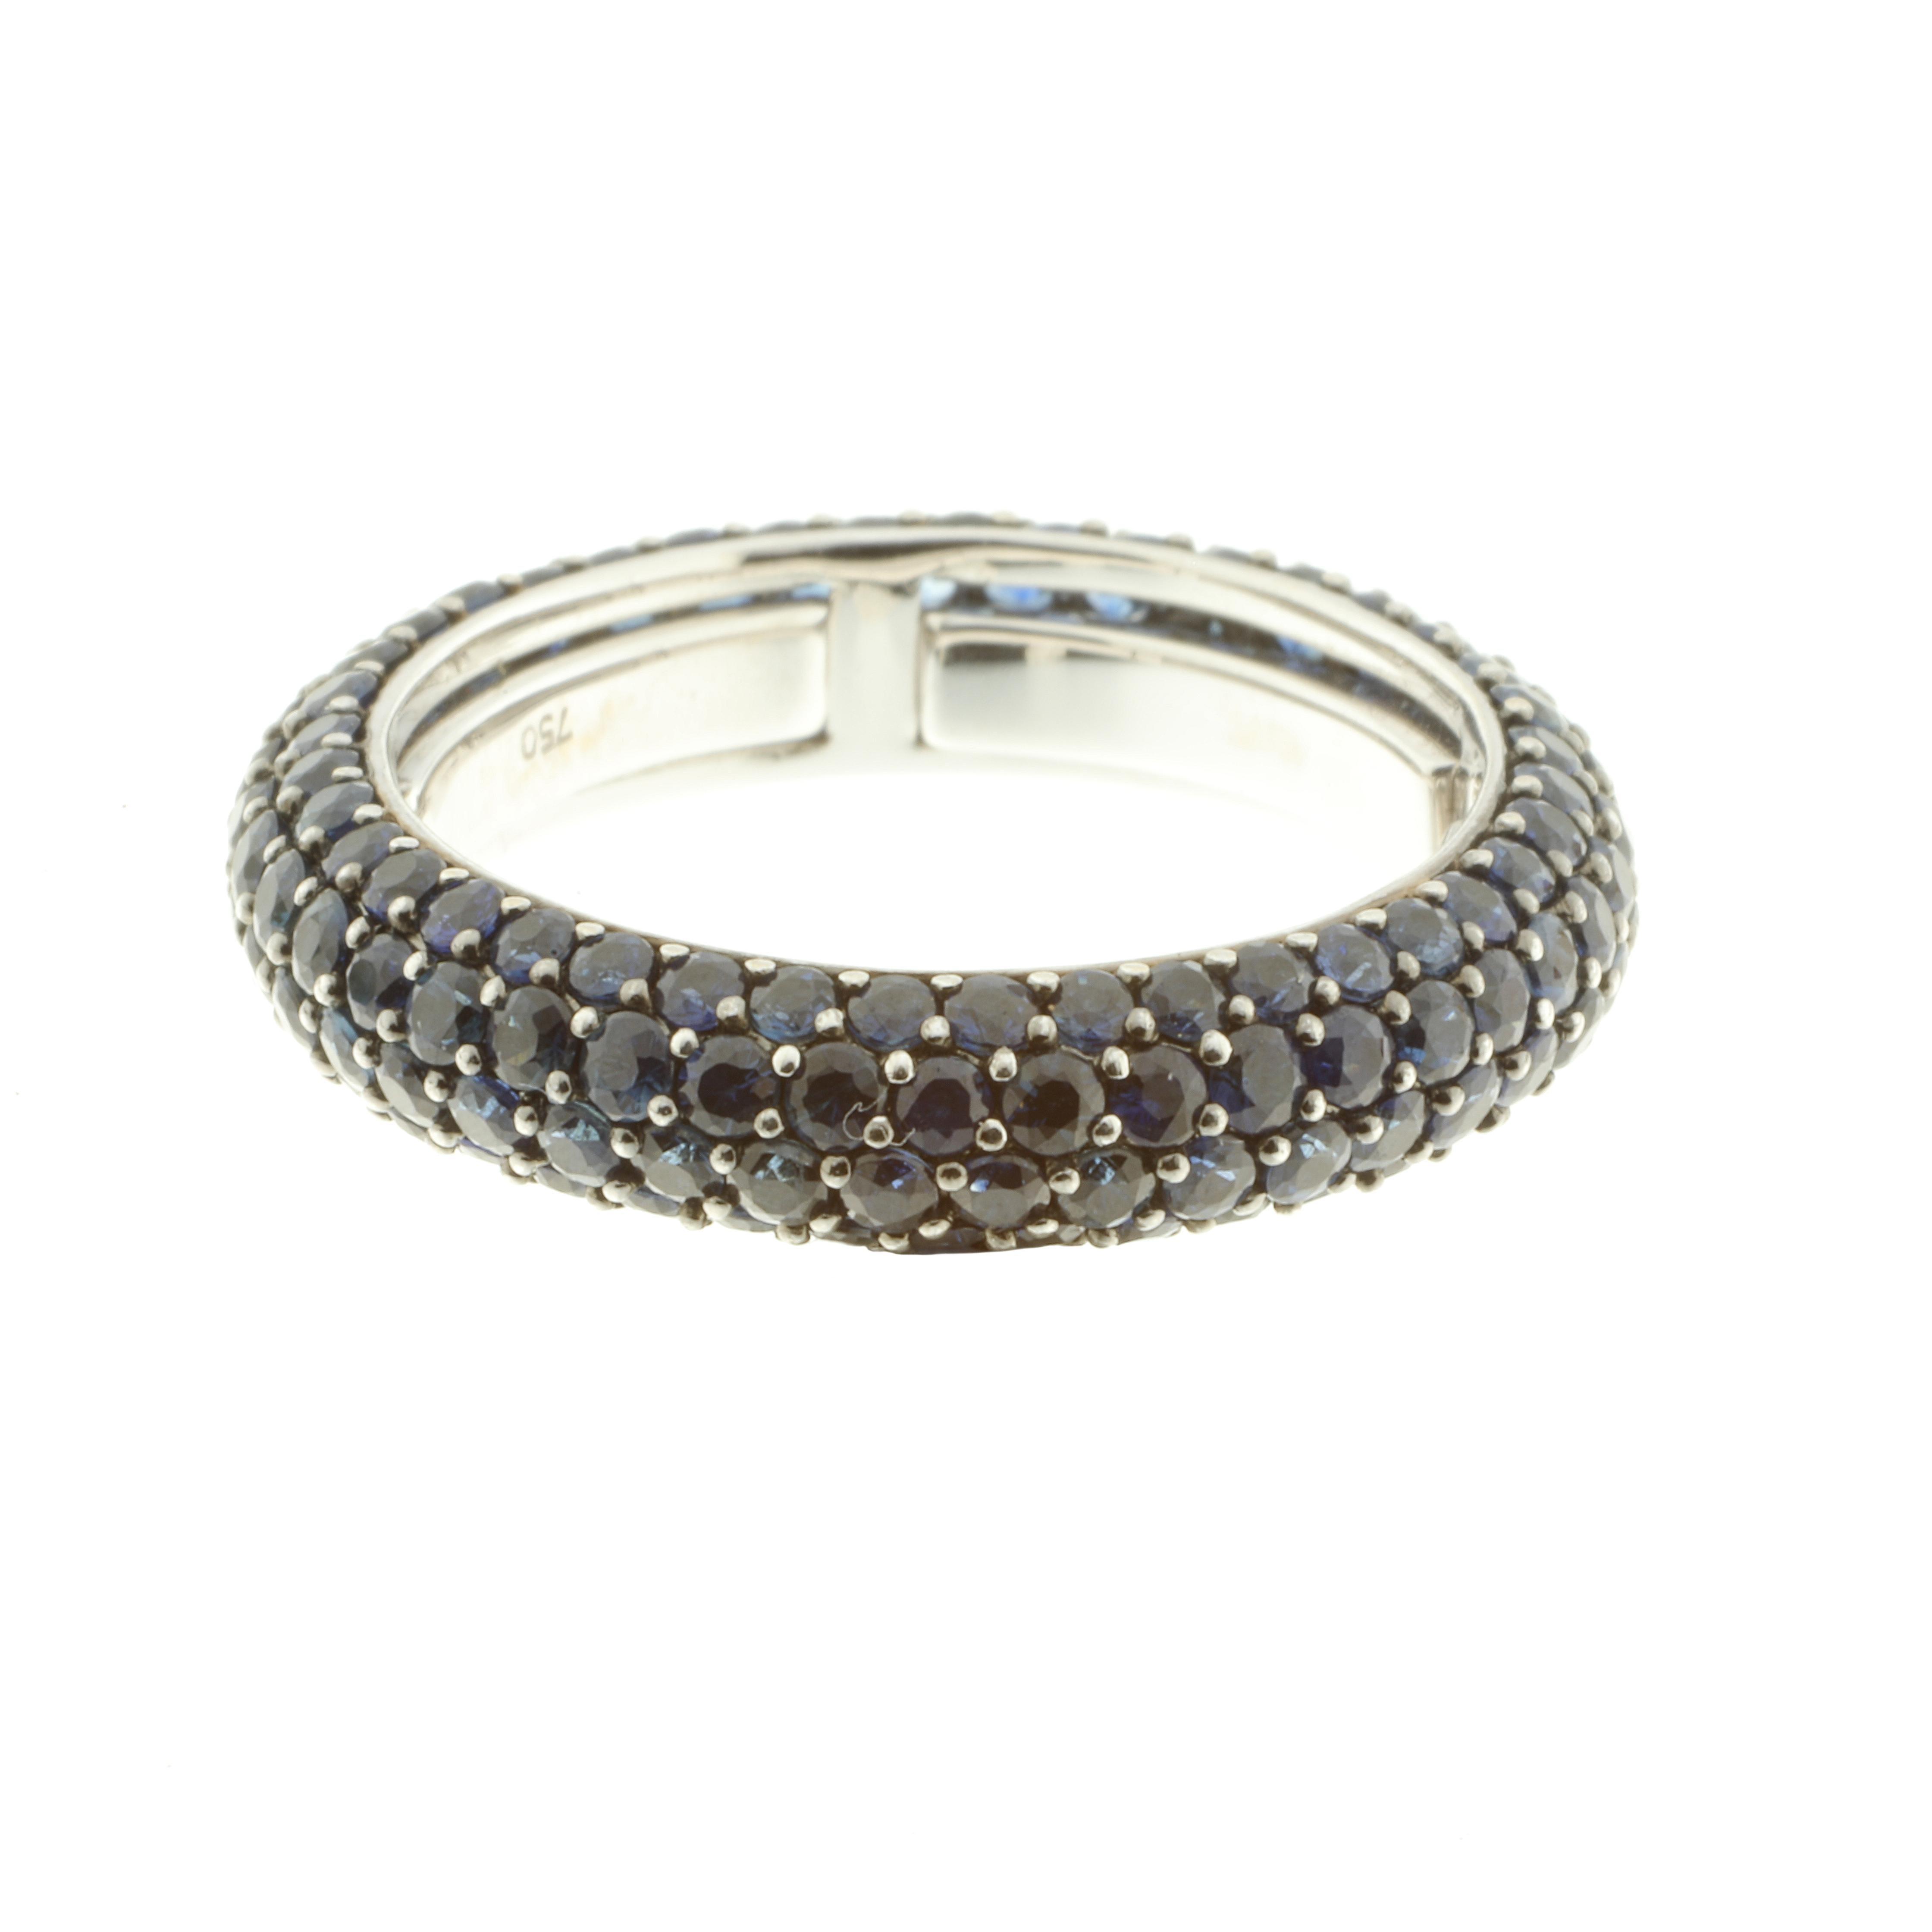 A luxuriously sleek and elegant 18 karat white gold and 3.59-carat blue sapphire eternity ring. The ring is fabulous to wear, inside the band are a series of sprung sizers which comfortably fit the ring to US sizes 6-7.25. 

The piece stands out as